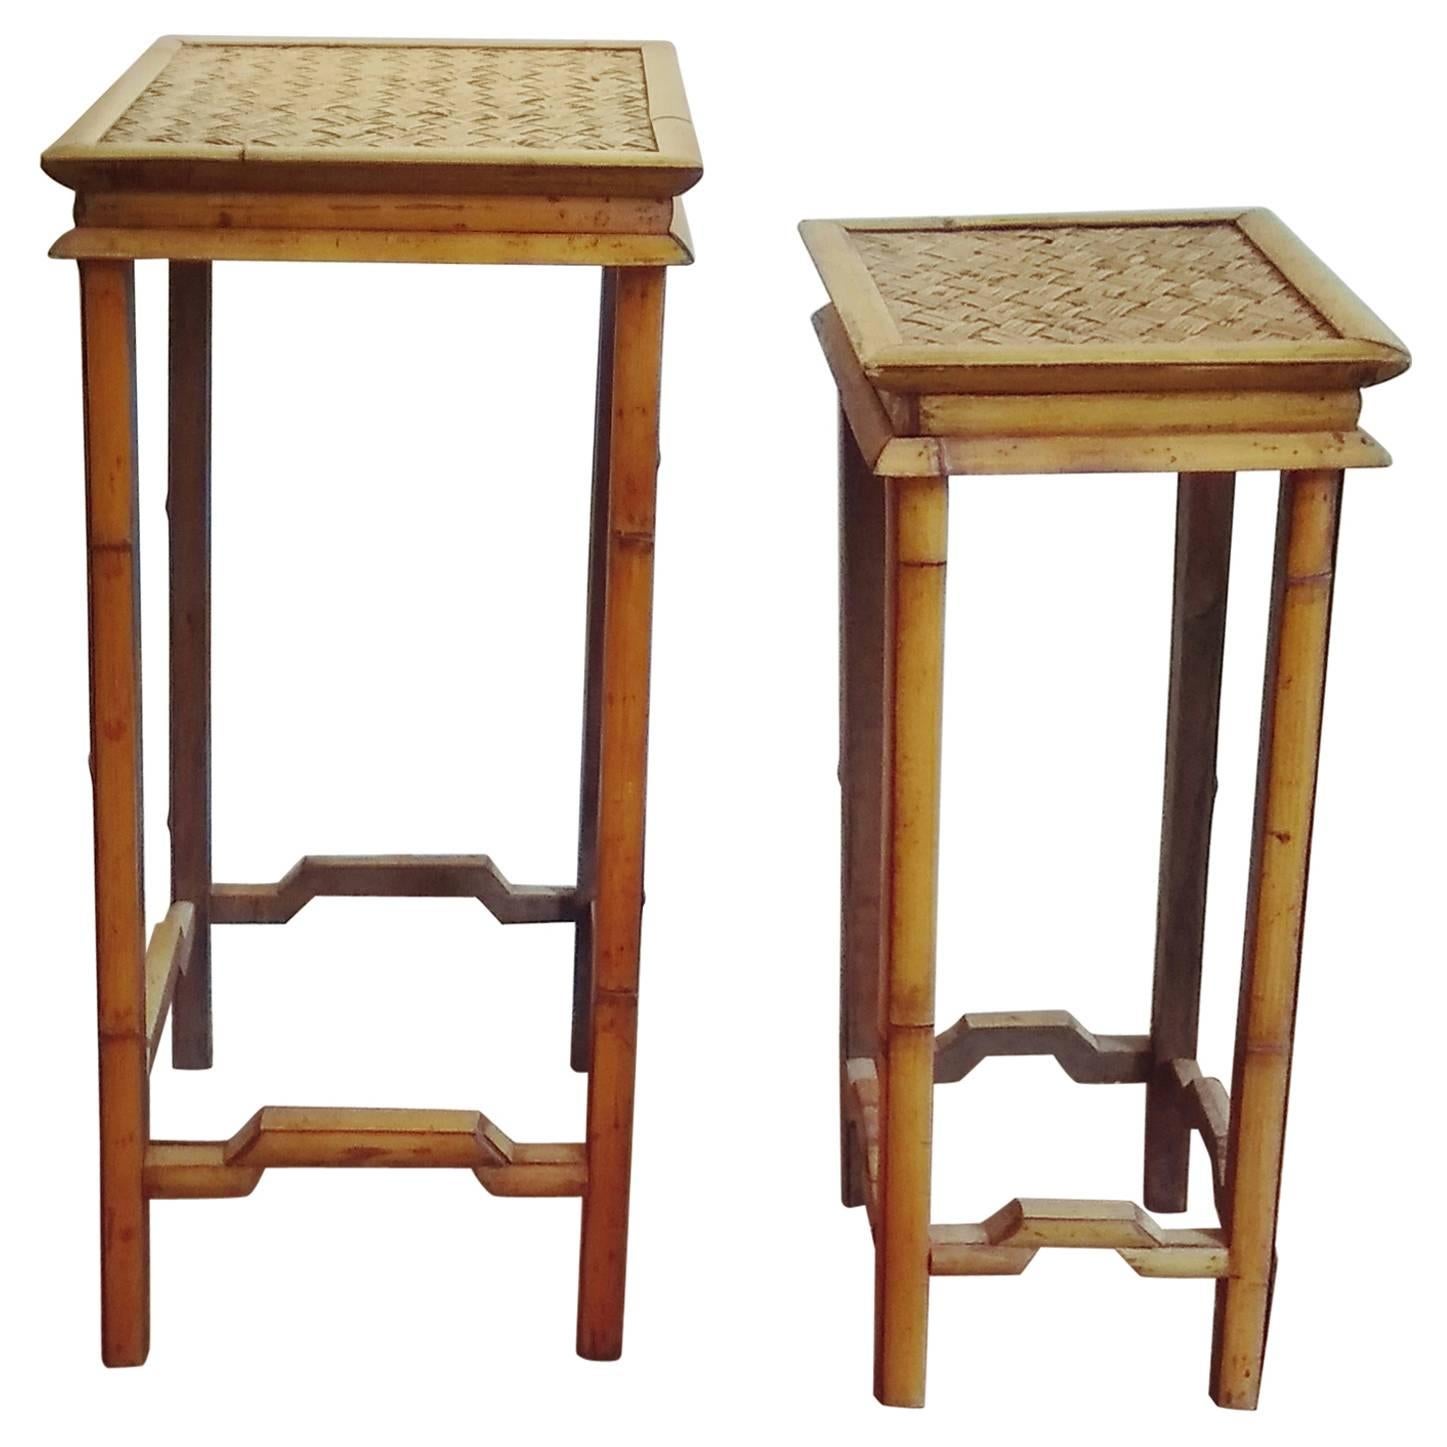 Late 19th Century Bamboo Stands